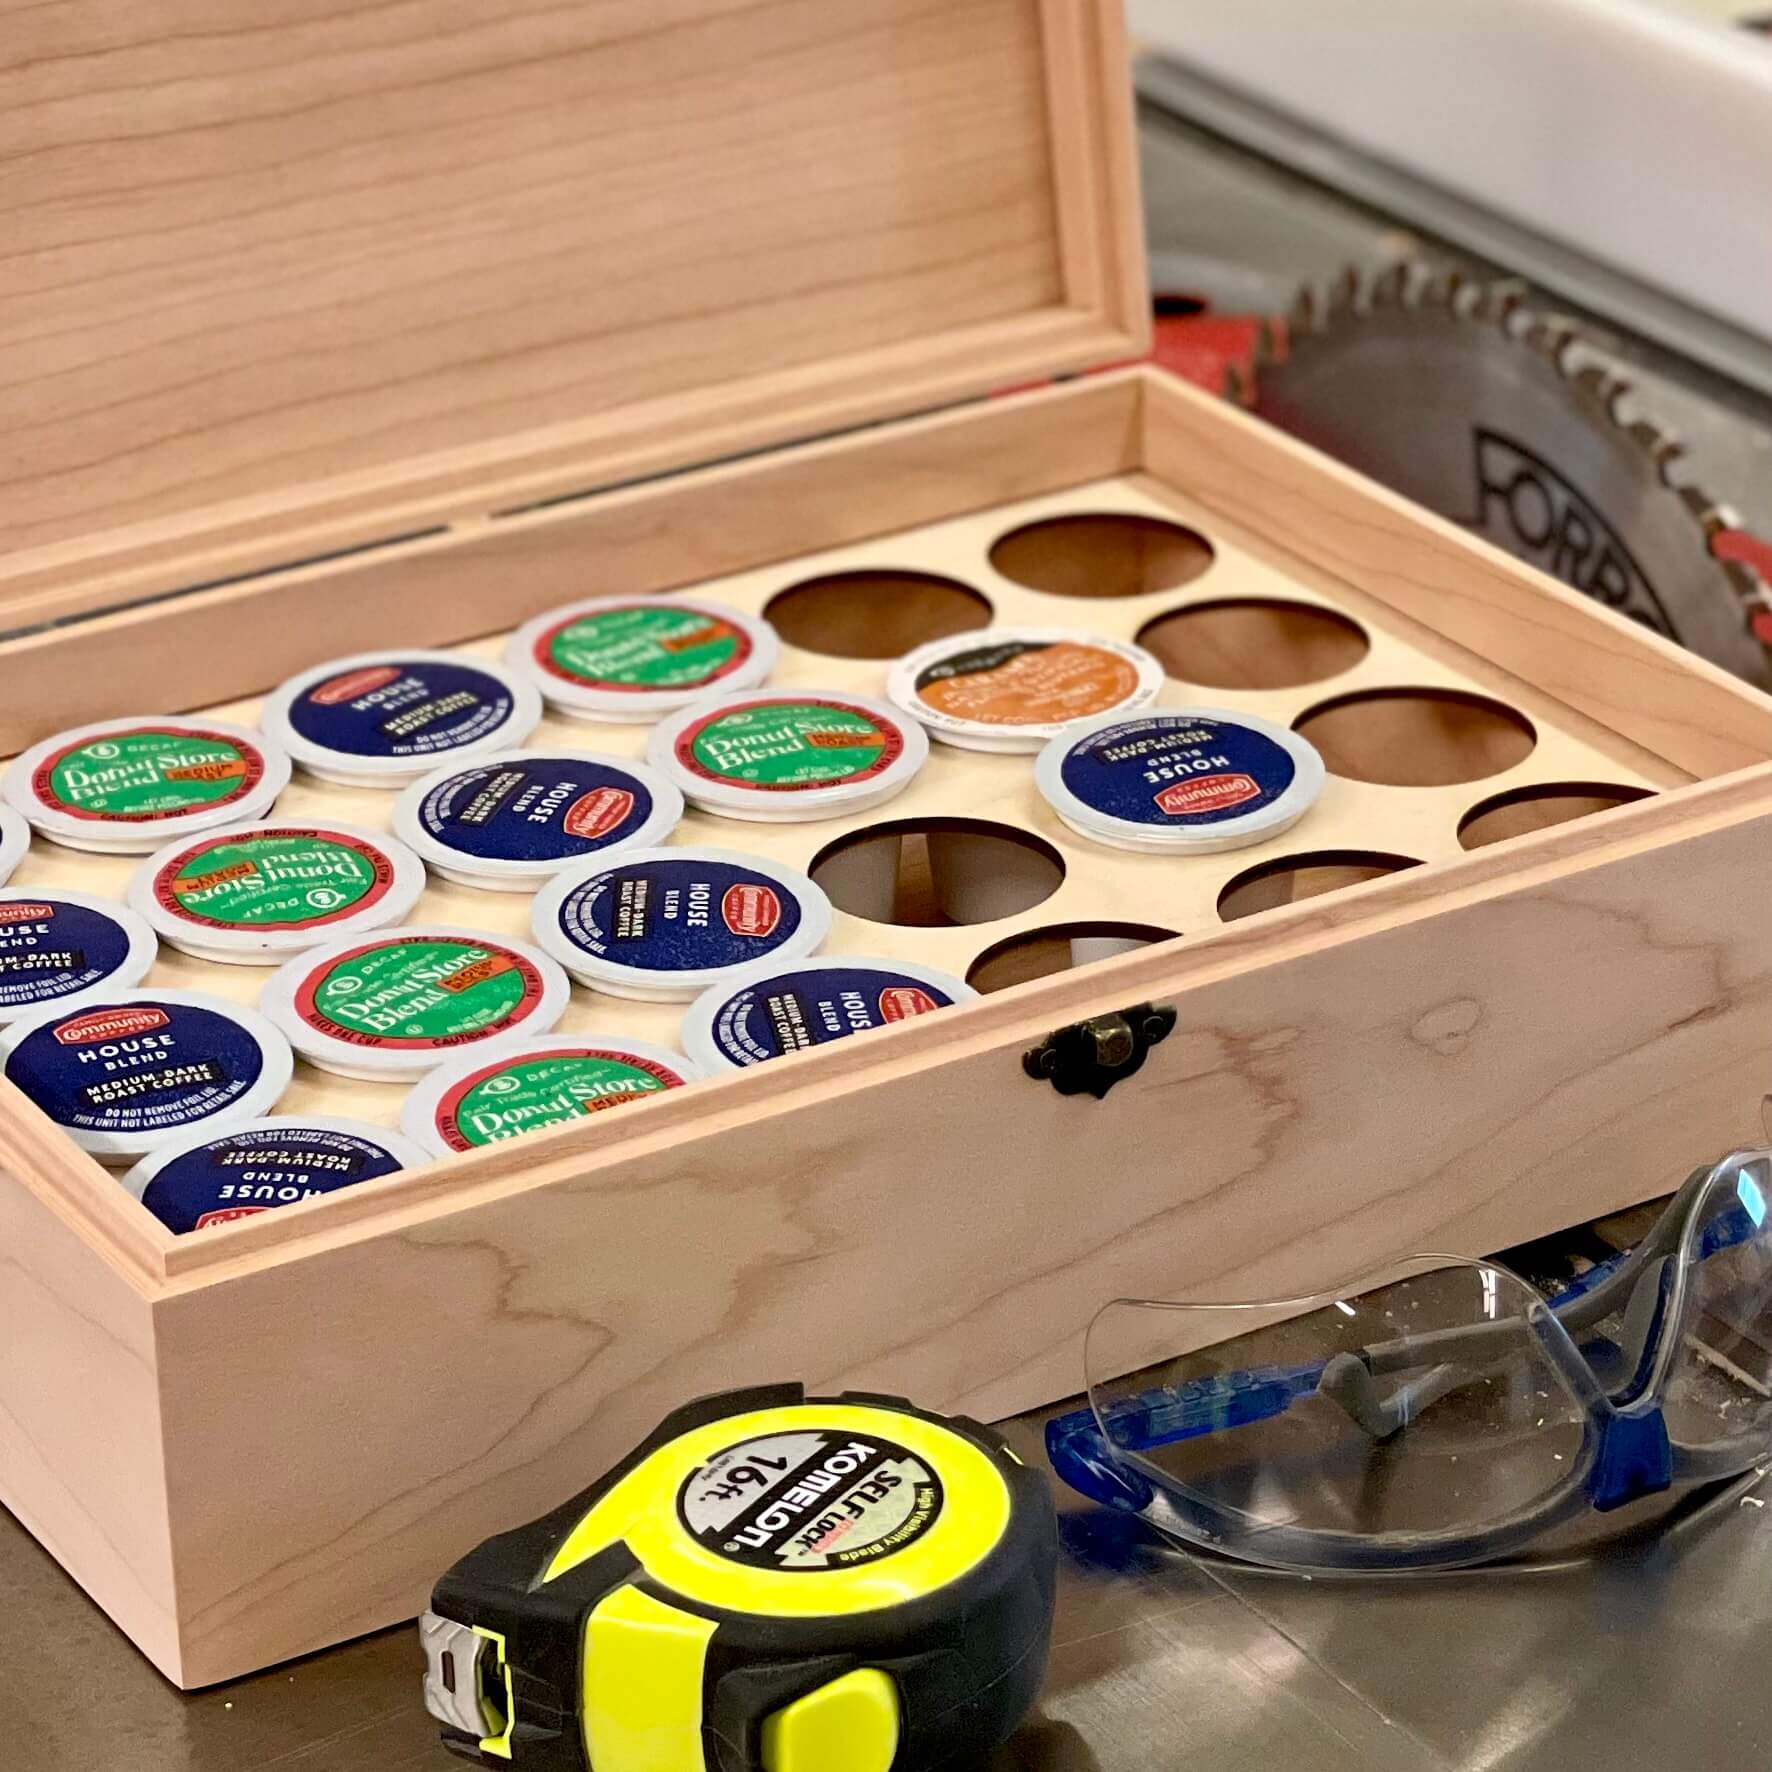 https://www.thedesigncraftstudio.com/cdn/shop/products/the-designcraft-studio-tea-boxes-k-cup-storage-box-all-you-need-is-love-and-coffee-our-classic-handmade-design-the-designcraft-studio-keurig-storage-idea-35369080160417.jpg?v=1663616342&width=1946